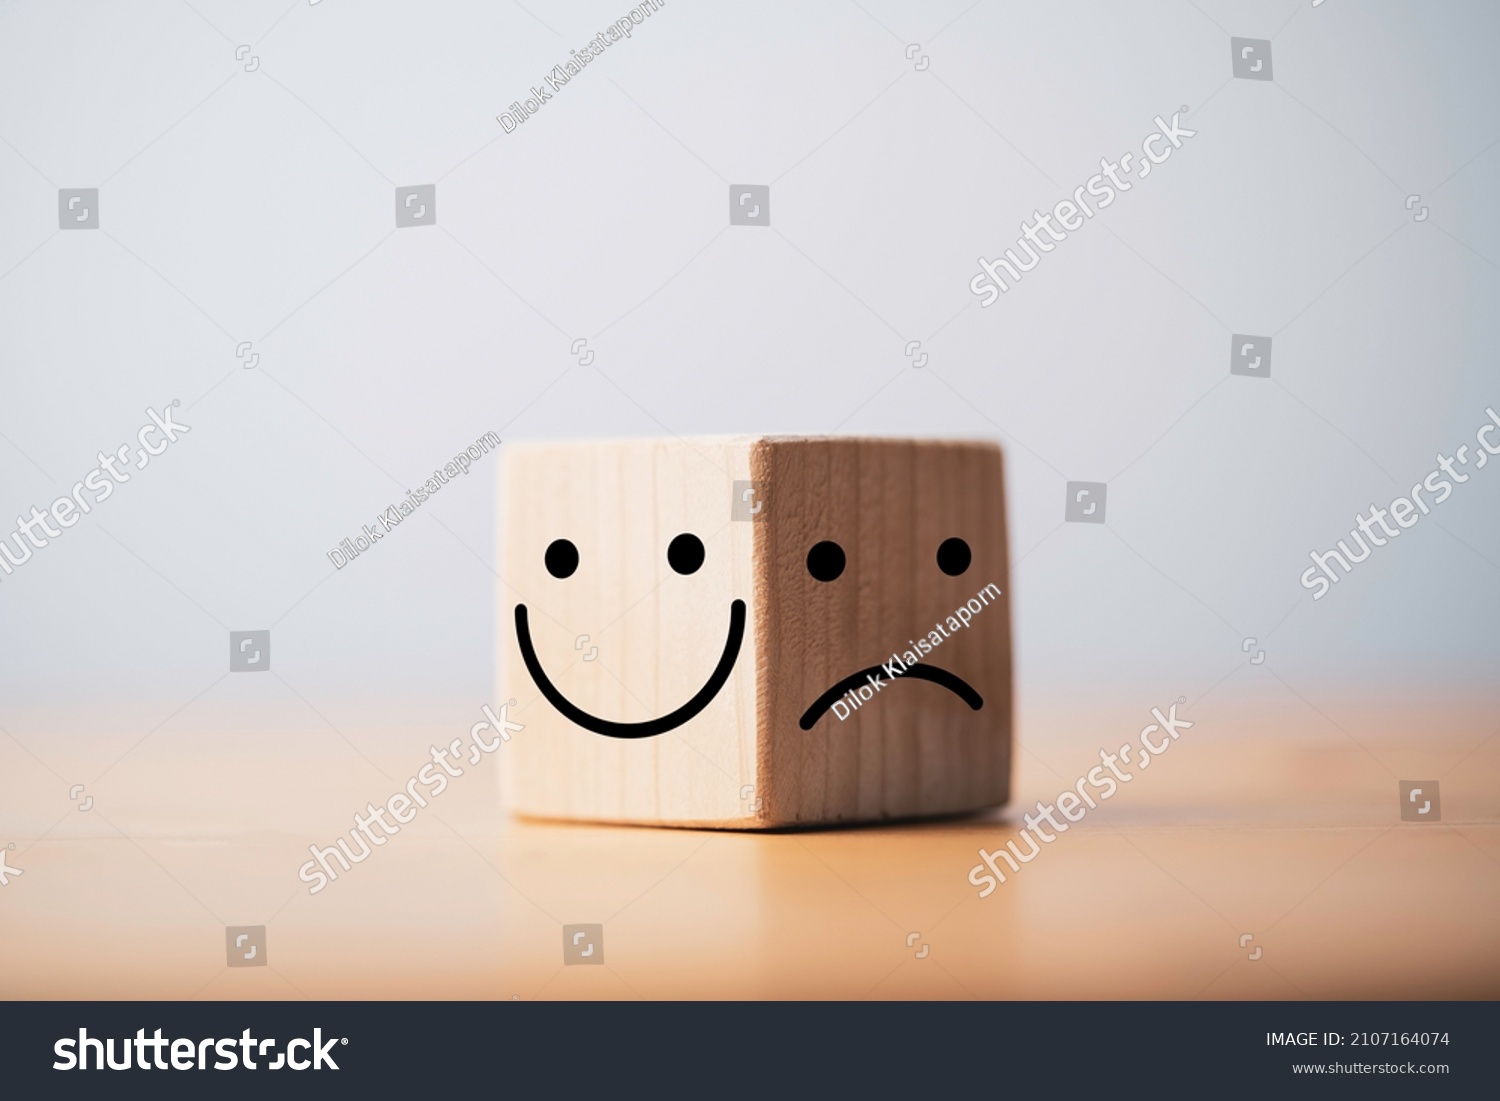 Smile face in bright side and sad face in dark side on wooden block cube for positive mindset selection concept. #2107164074